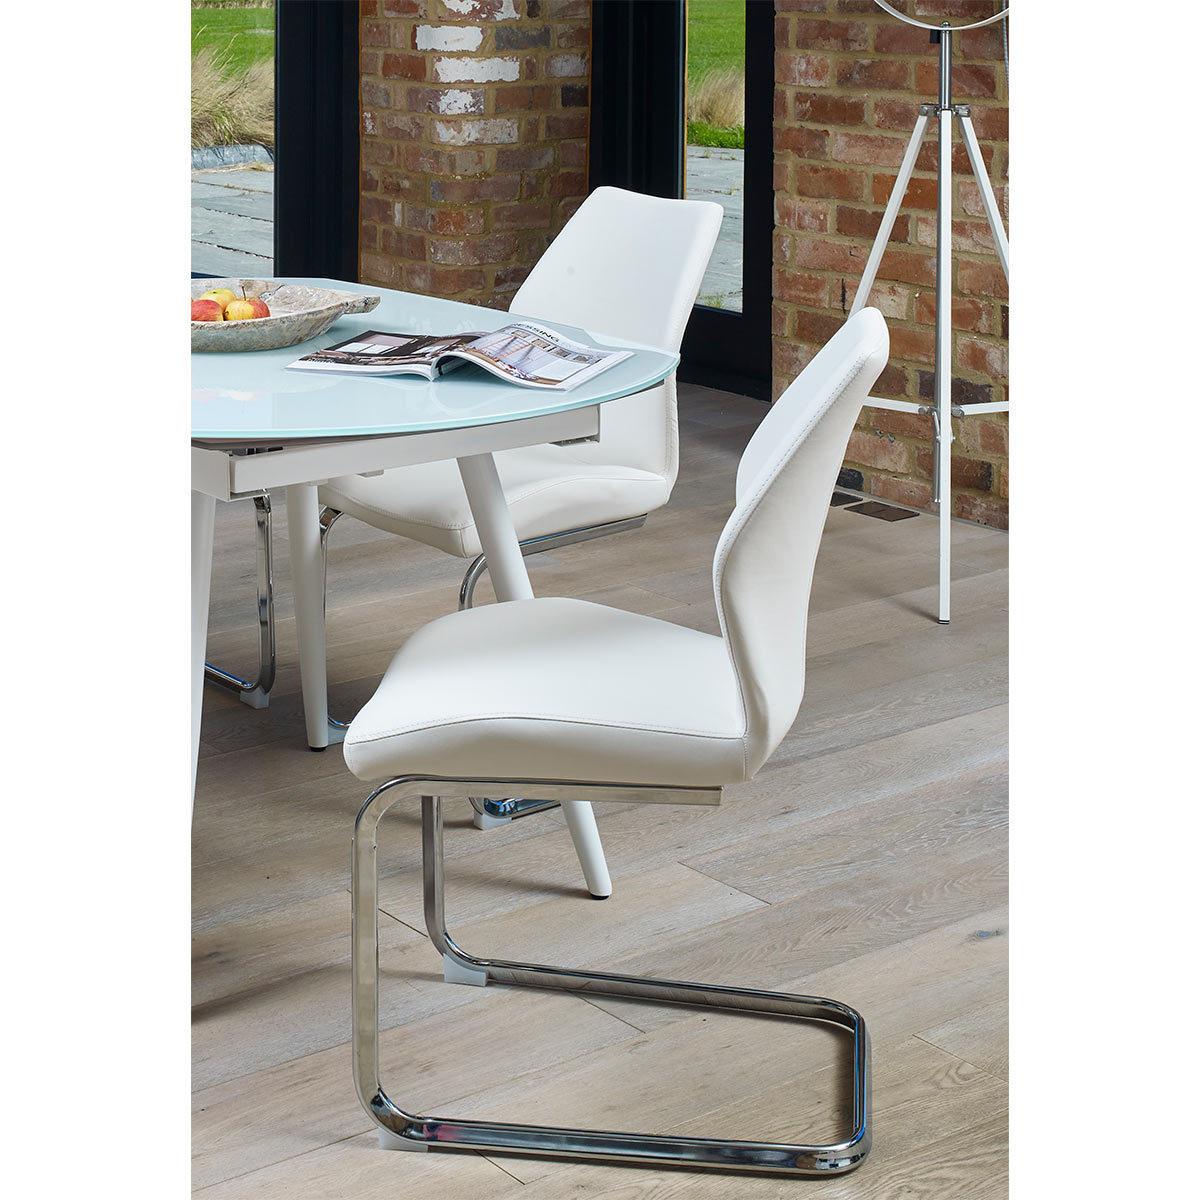 Monza White Faux Leather Cantilever Dining Chair 2 Pack Costco Uk